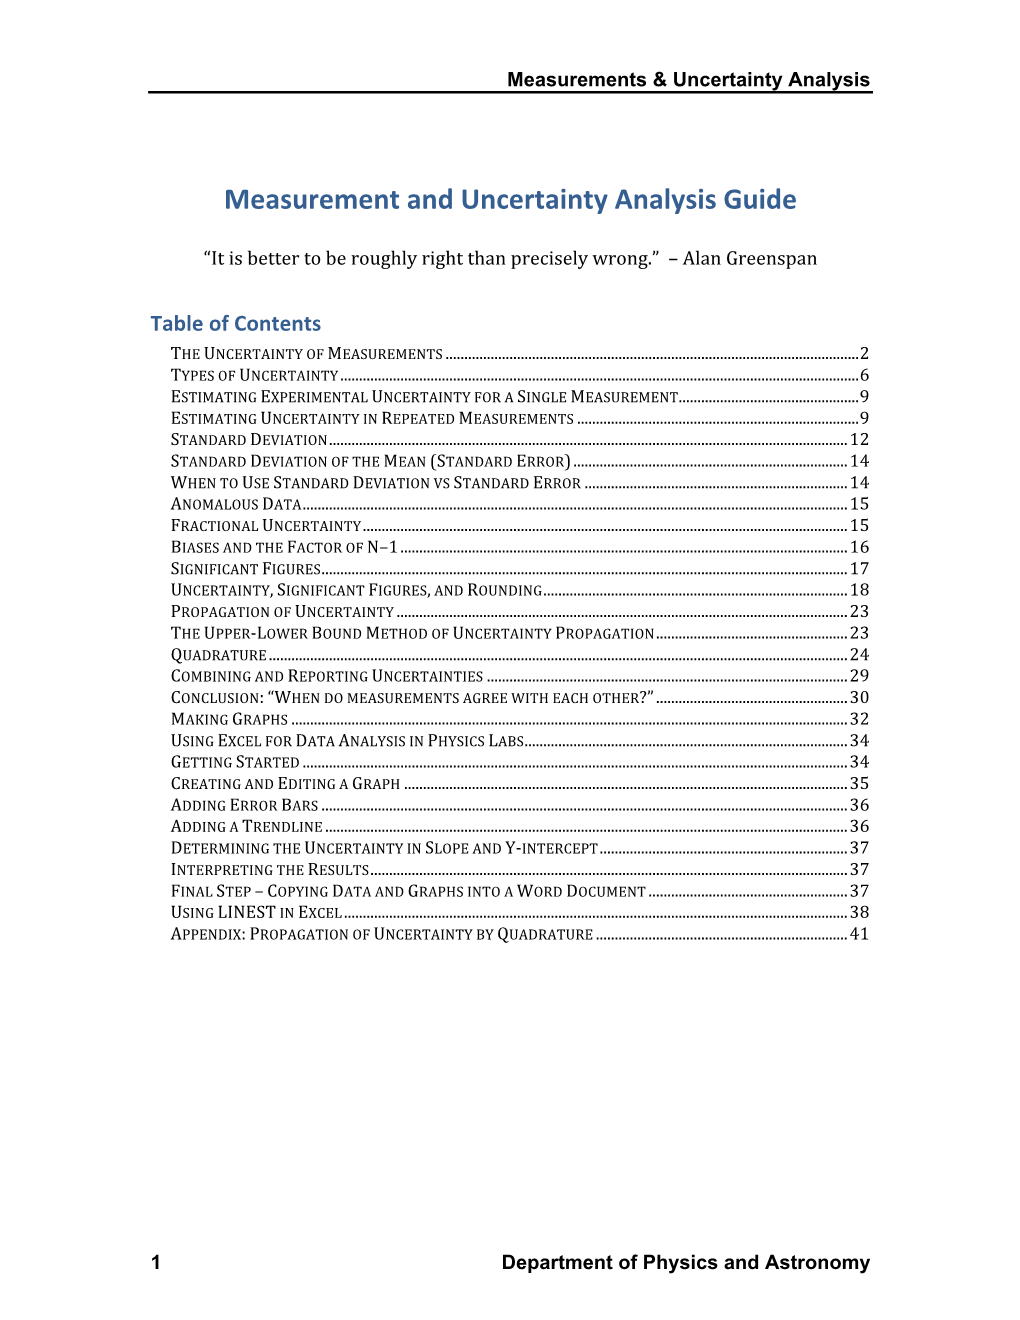 Measurements and Uncertainty Analysis